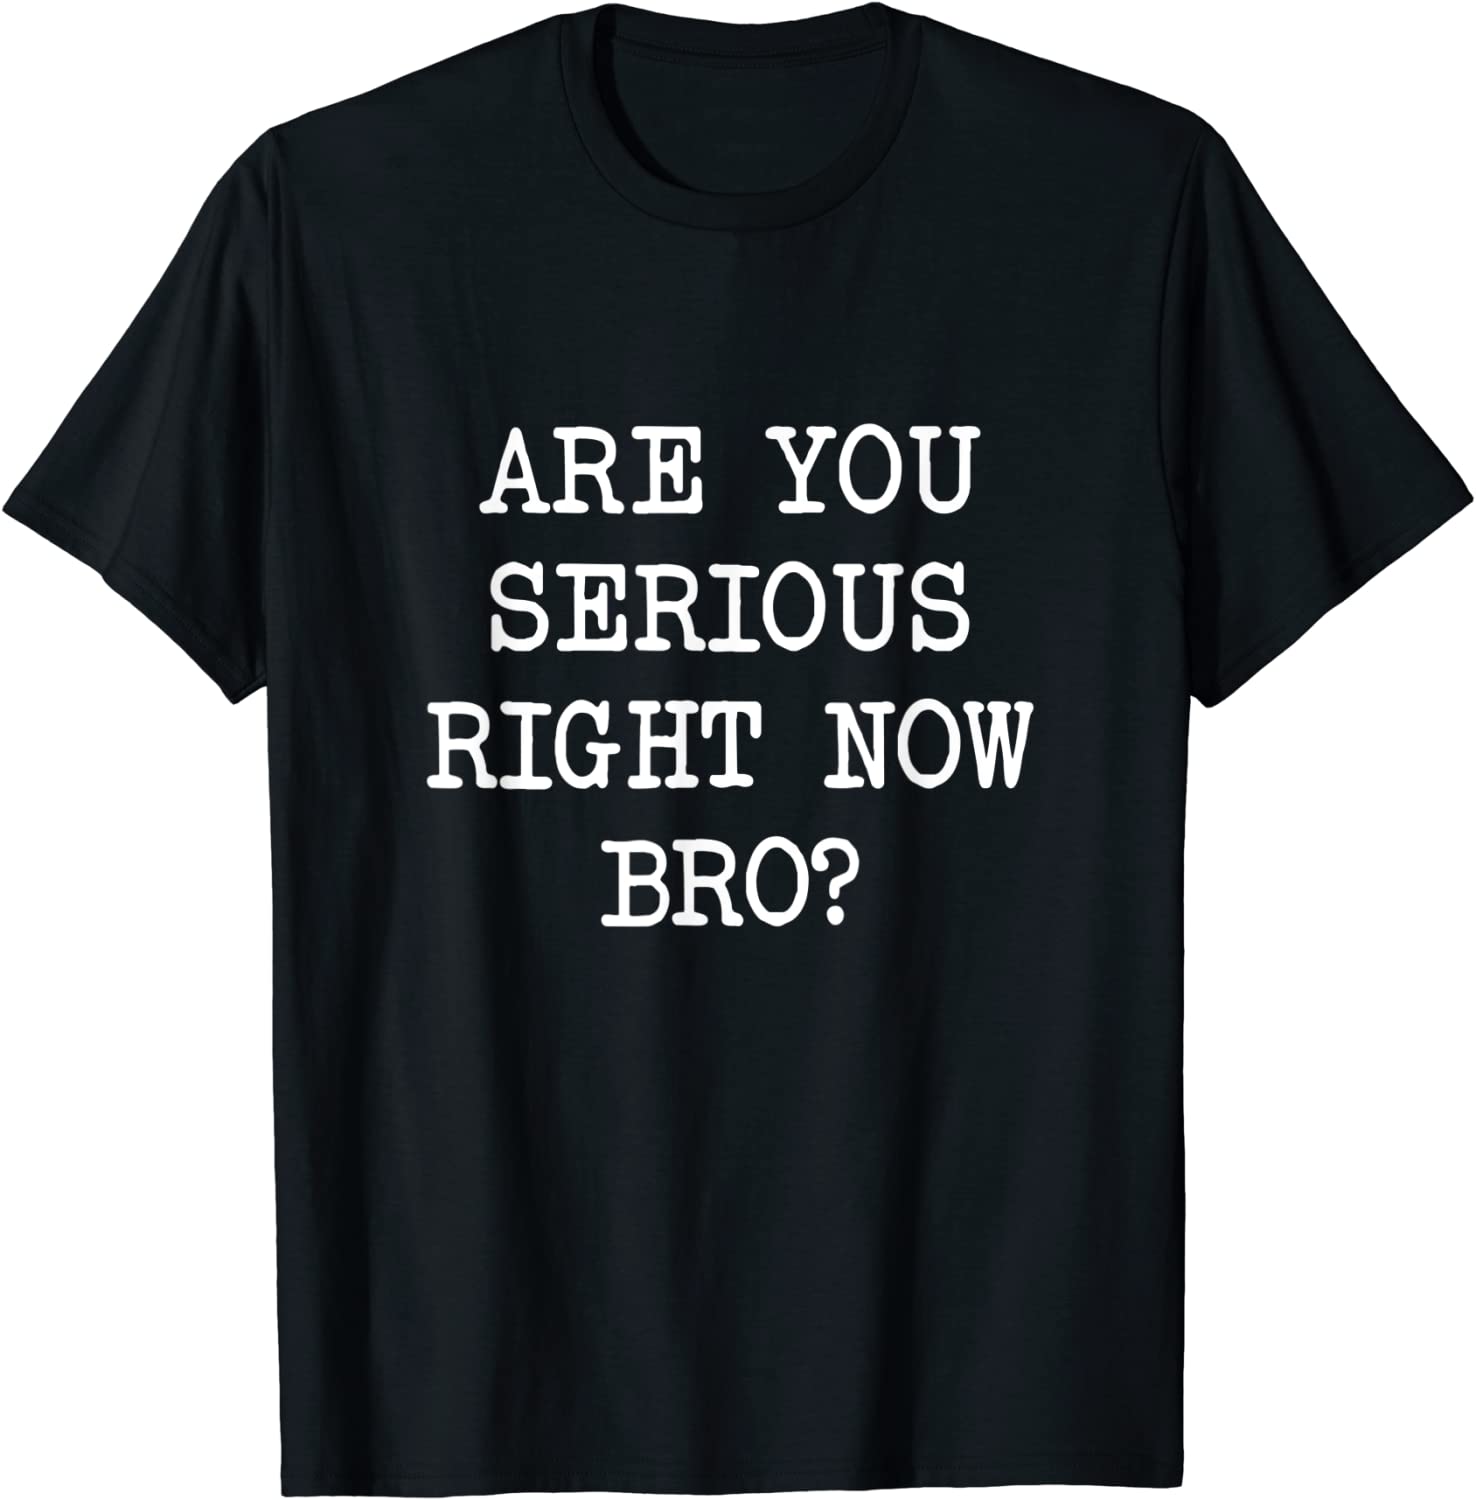 Are You Serious Right Now Bro? Tee Shirt - ShirtElephant Office